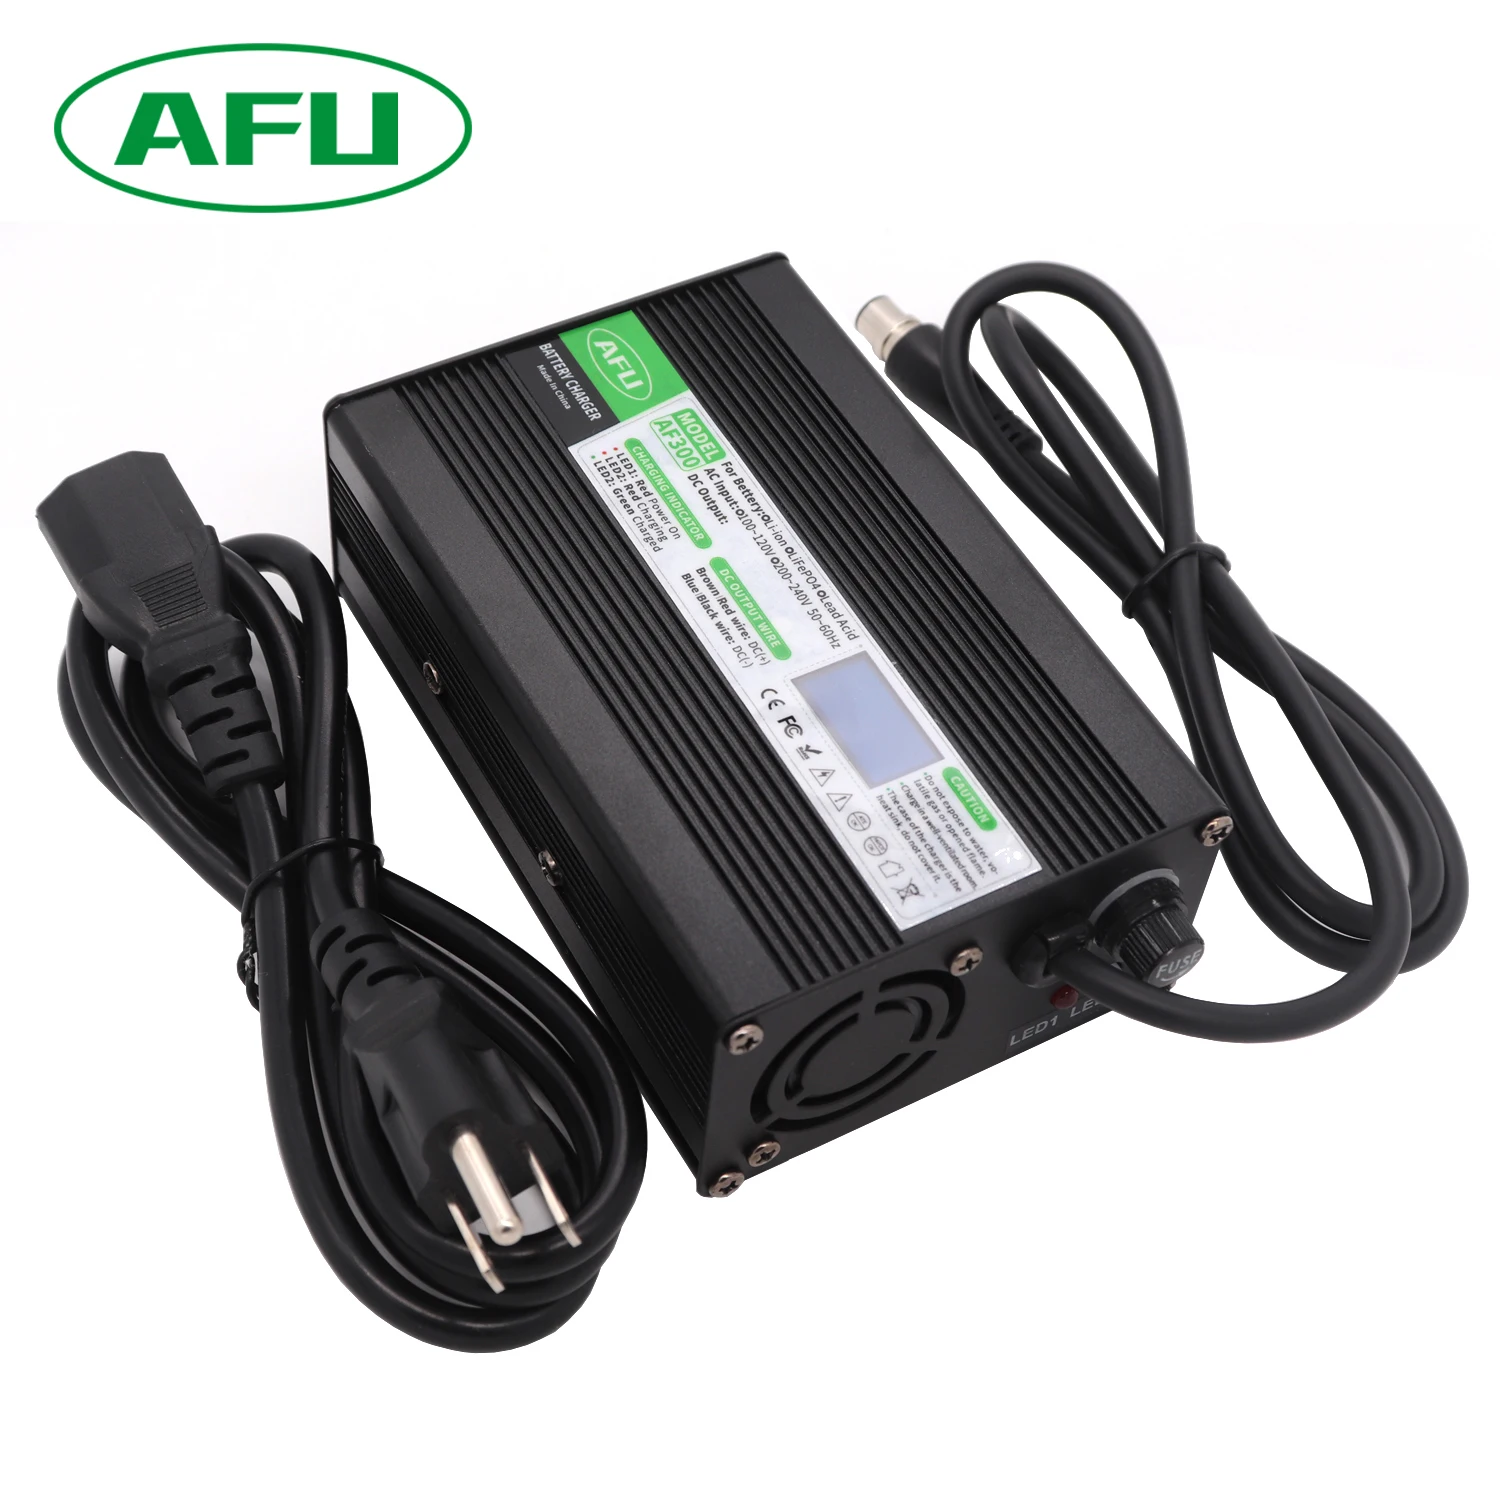 58.4V 4A LiFePO4 Battery Charger Usd For 16S 48V 51.2V With Fan OLED Display Fast Charger Battery Pack Robot Electric Charger images - 6